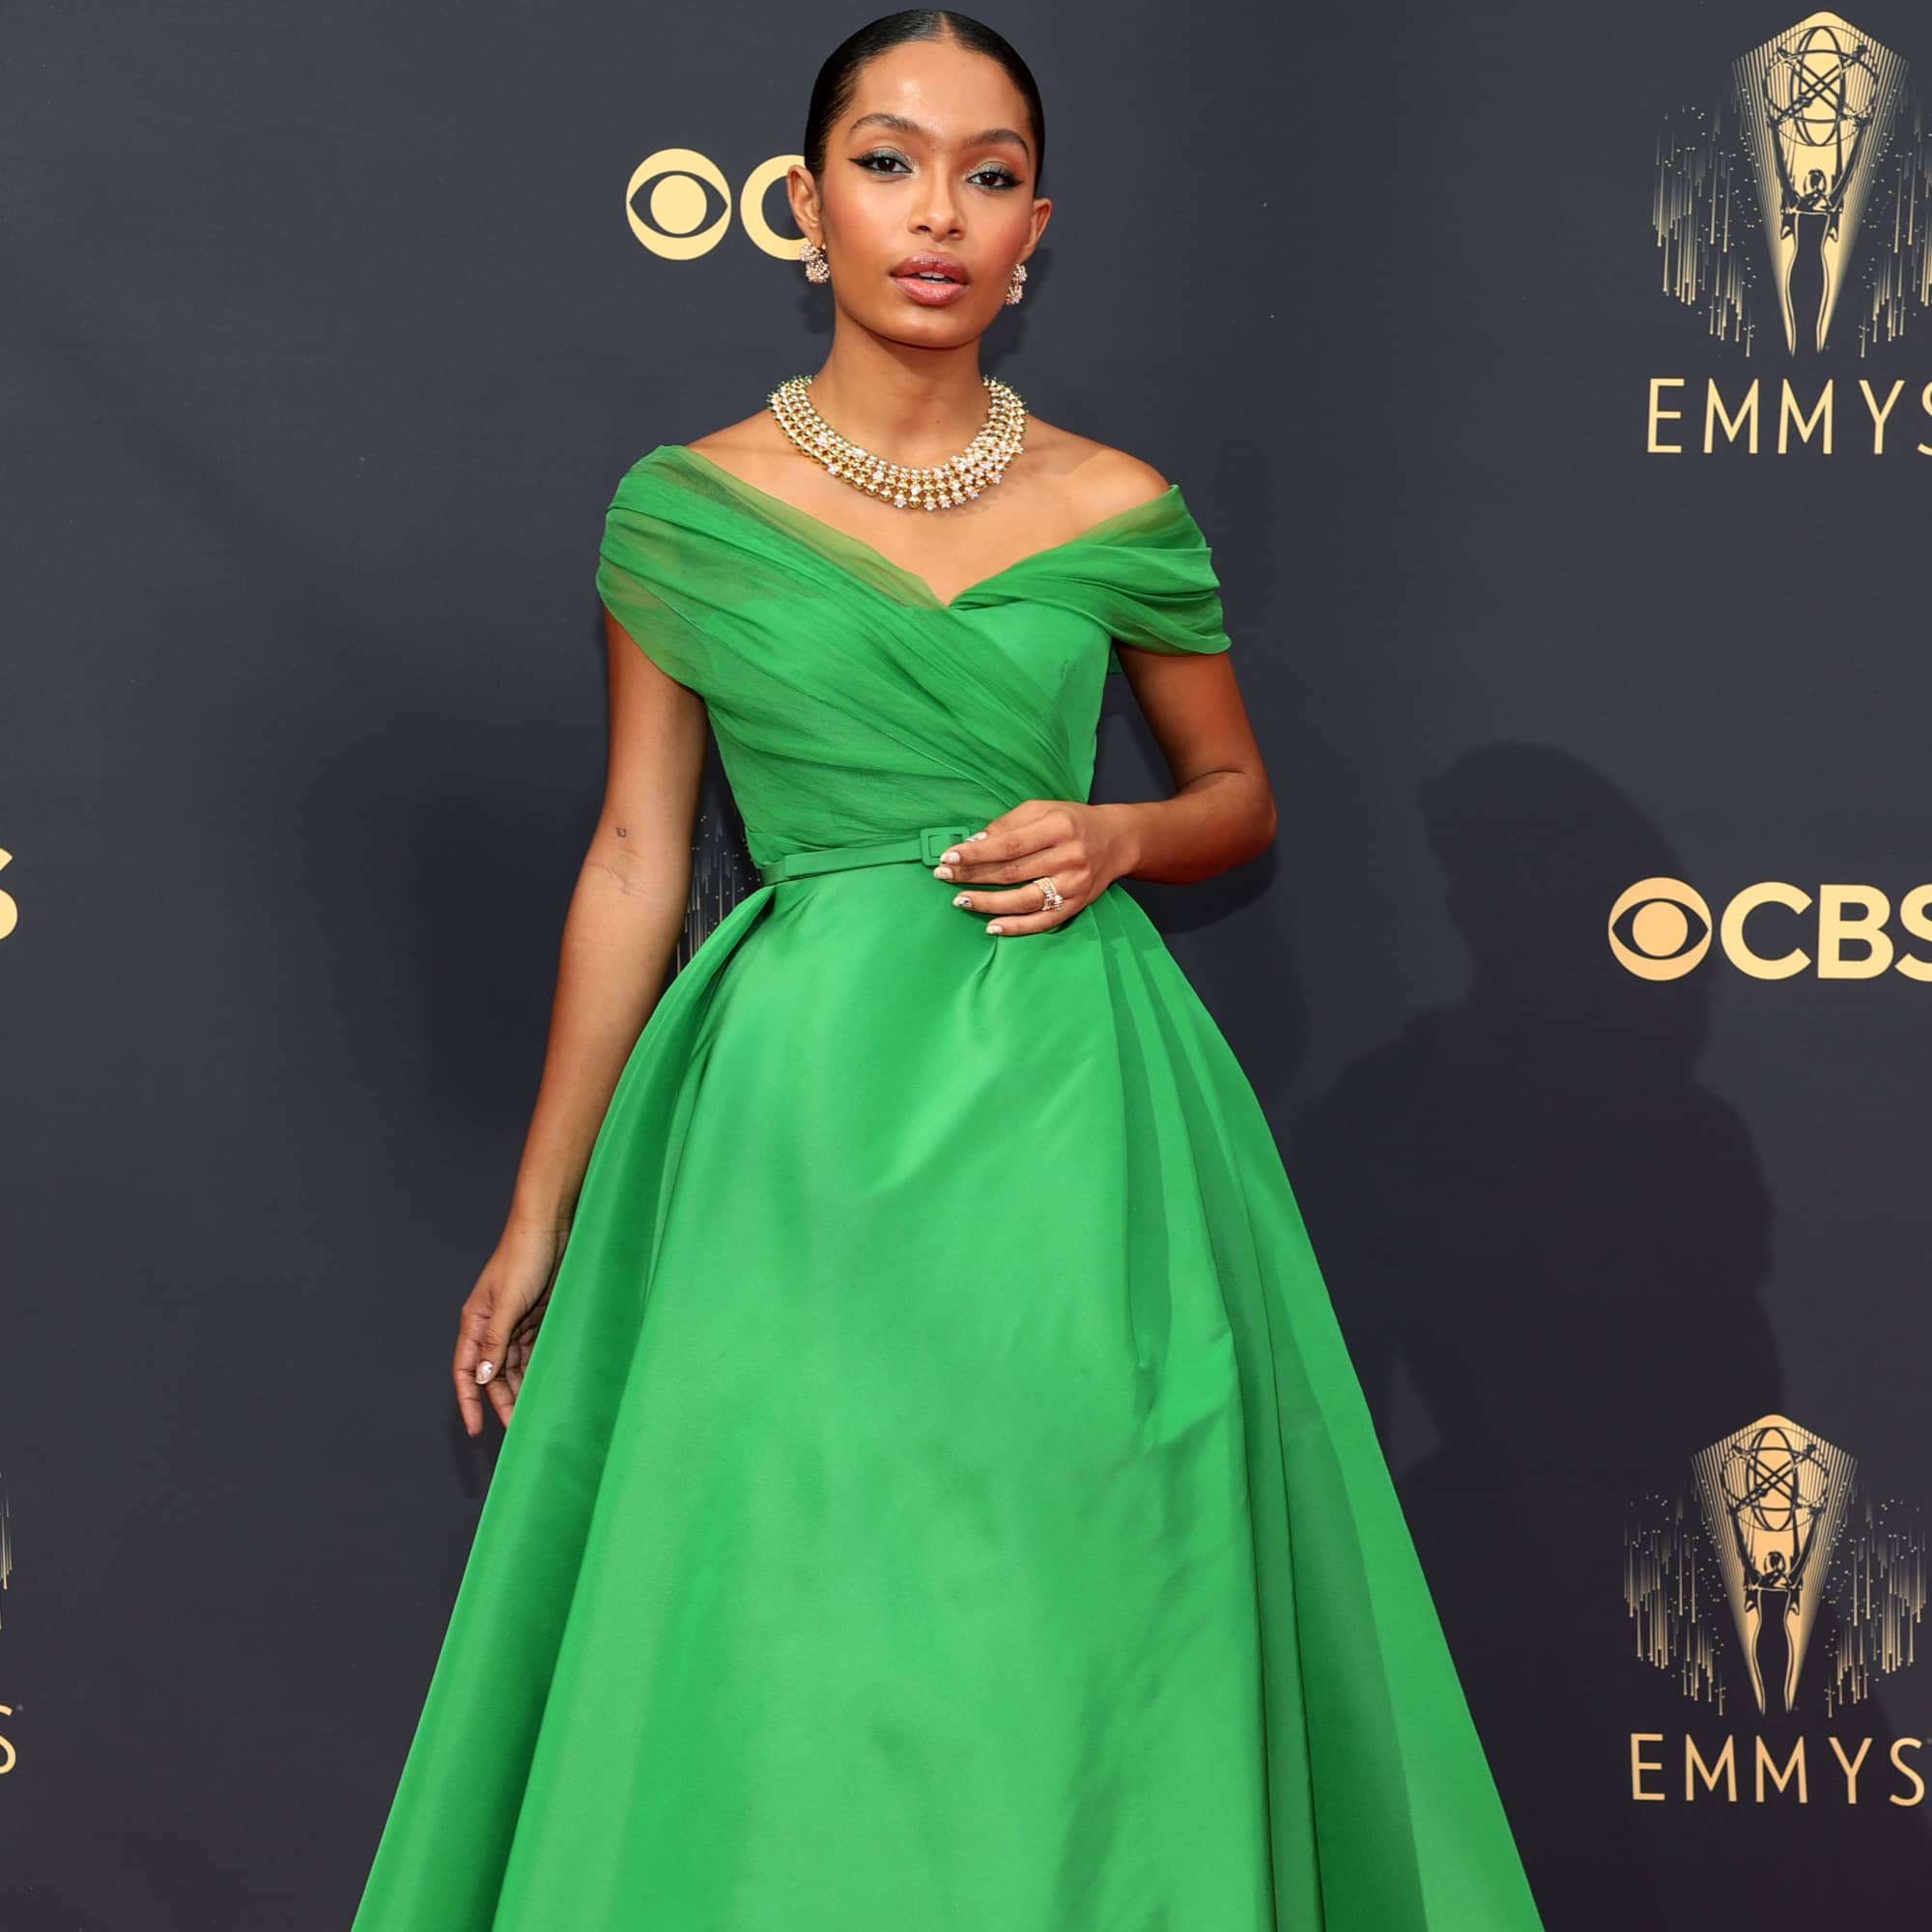 Yara Shahidi Wears the Most Sophisticated, Off-the-Shoulder Dress ...